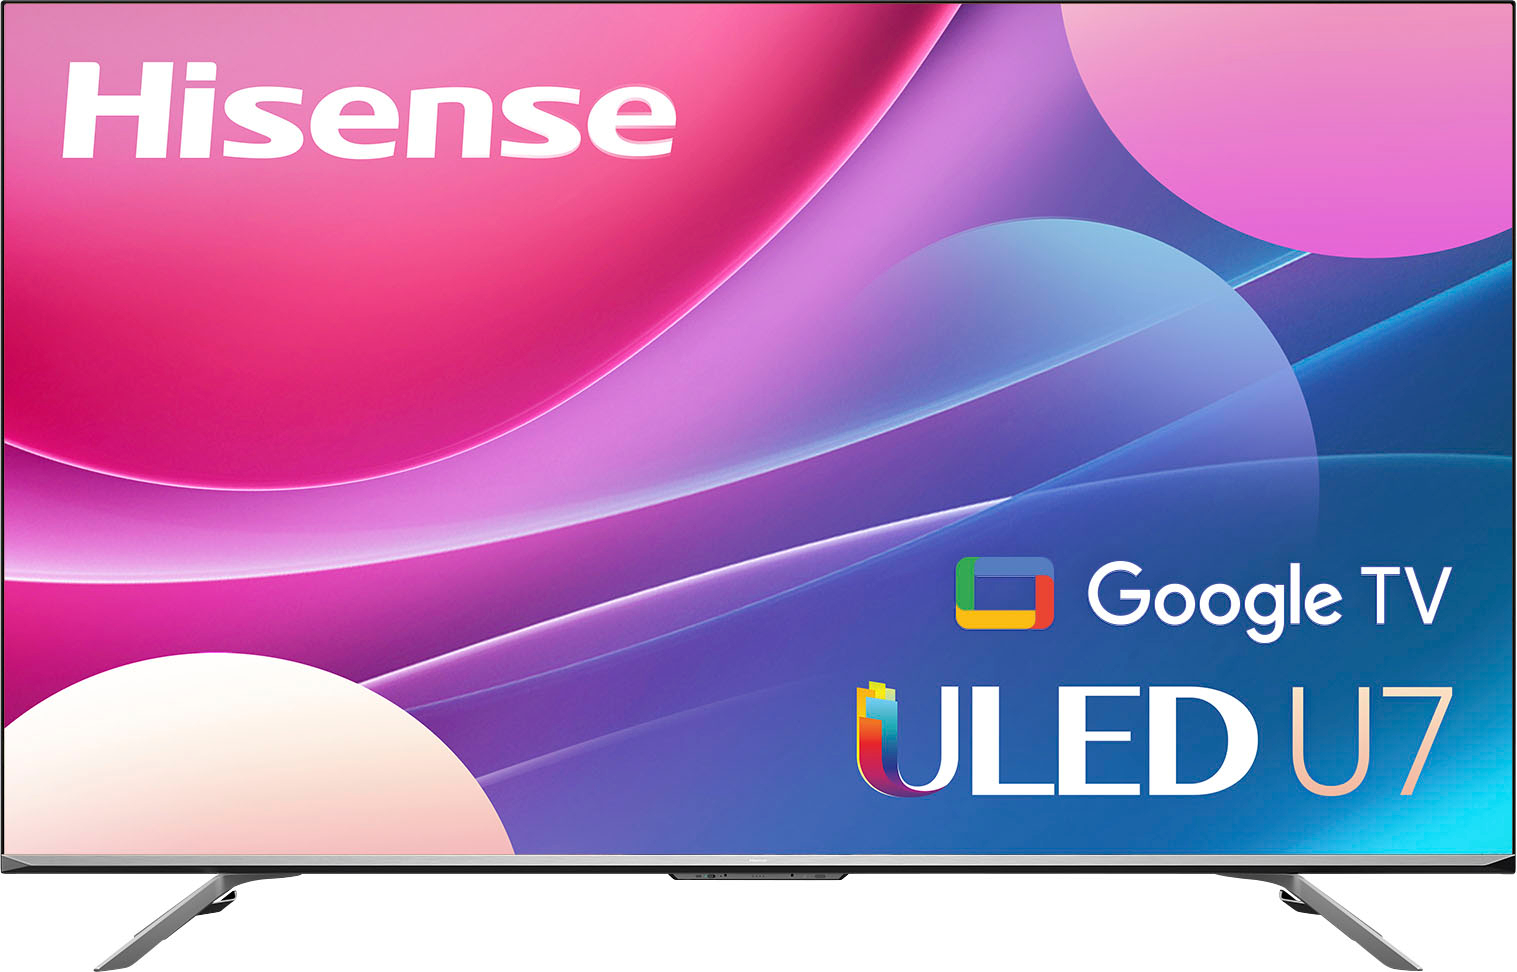 Hisense 100-Inch 4K HDR Mini LED TV Hits A New Low Price For A